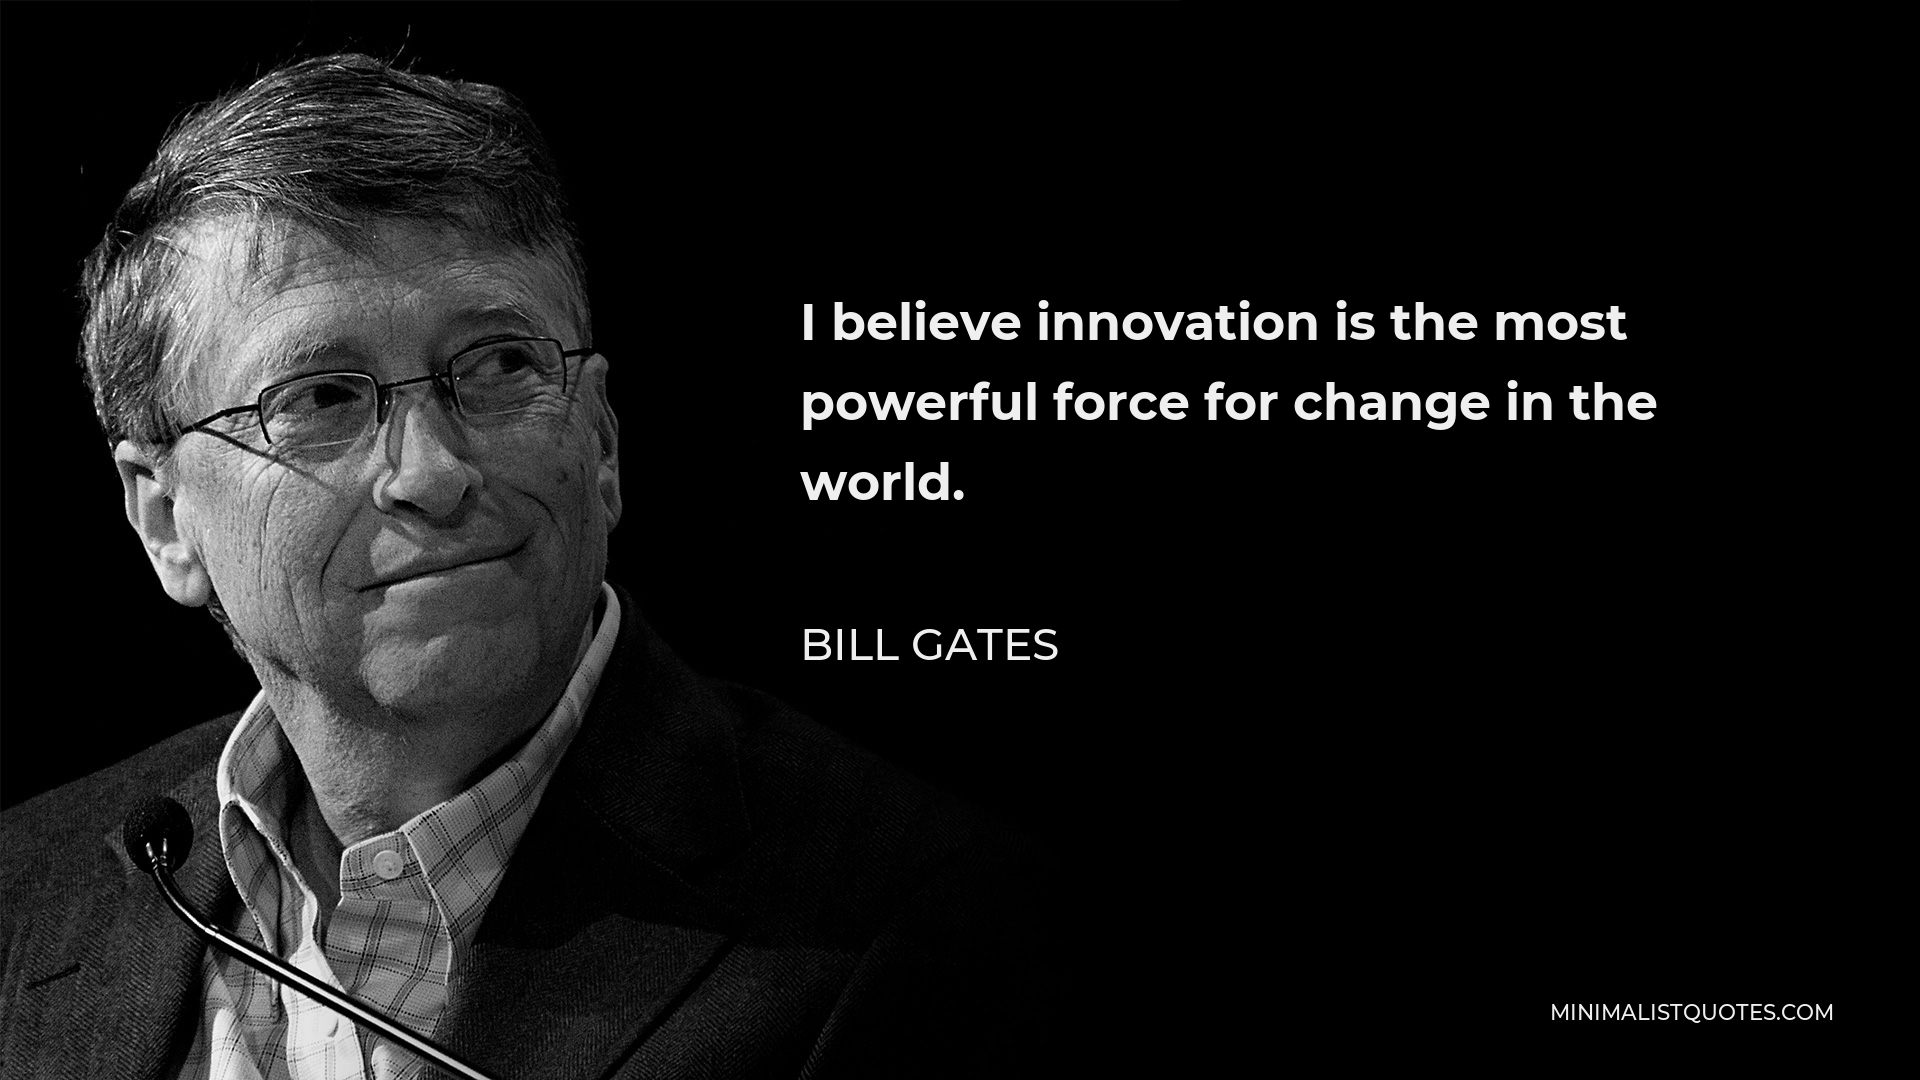 Bill Gates Quote - I believe innovation is the most powerful force for change in the world.